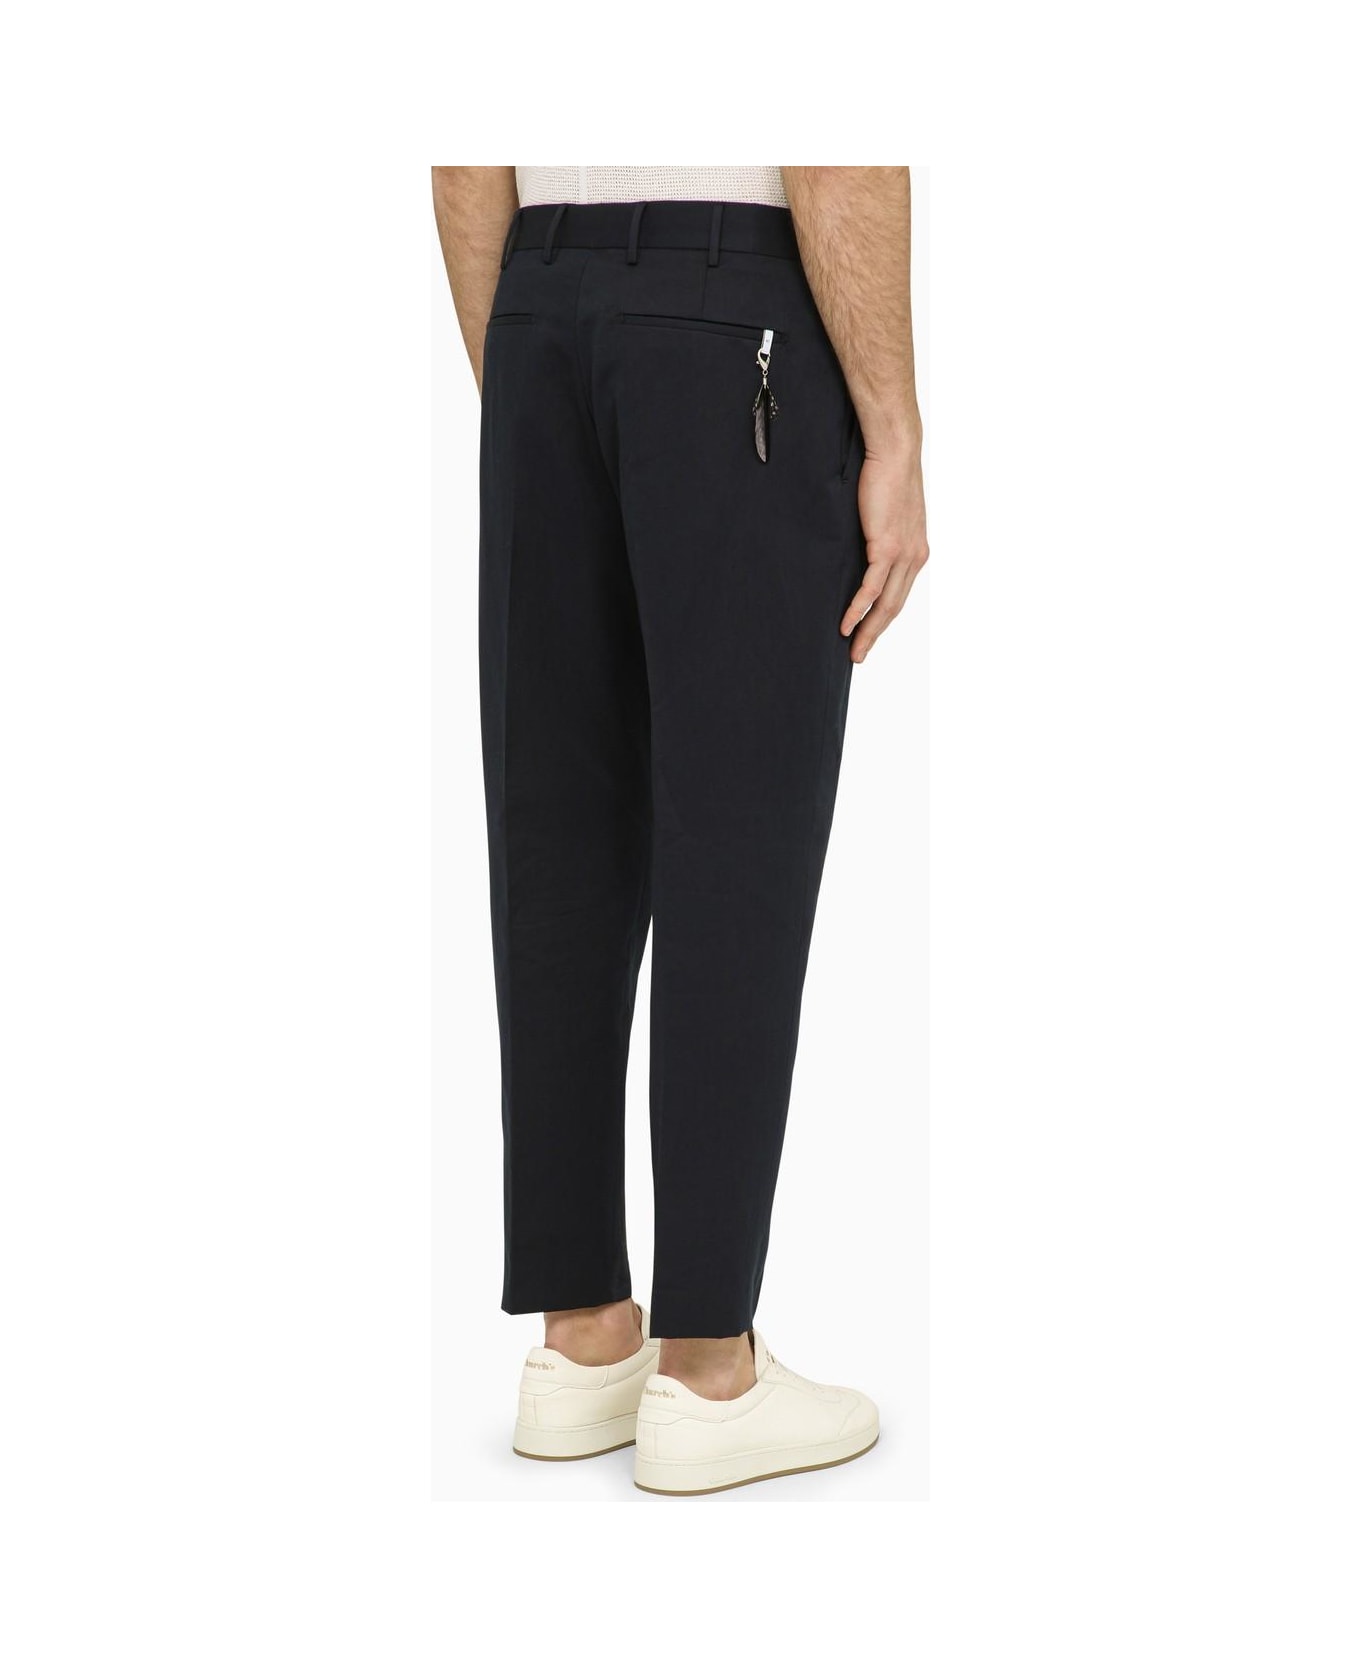 PT01 Navy Blue Slim Trousers In Cotton And Linen - 0360 BLUE